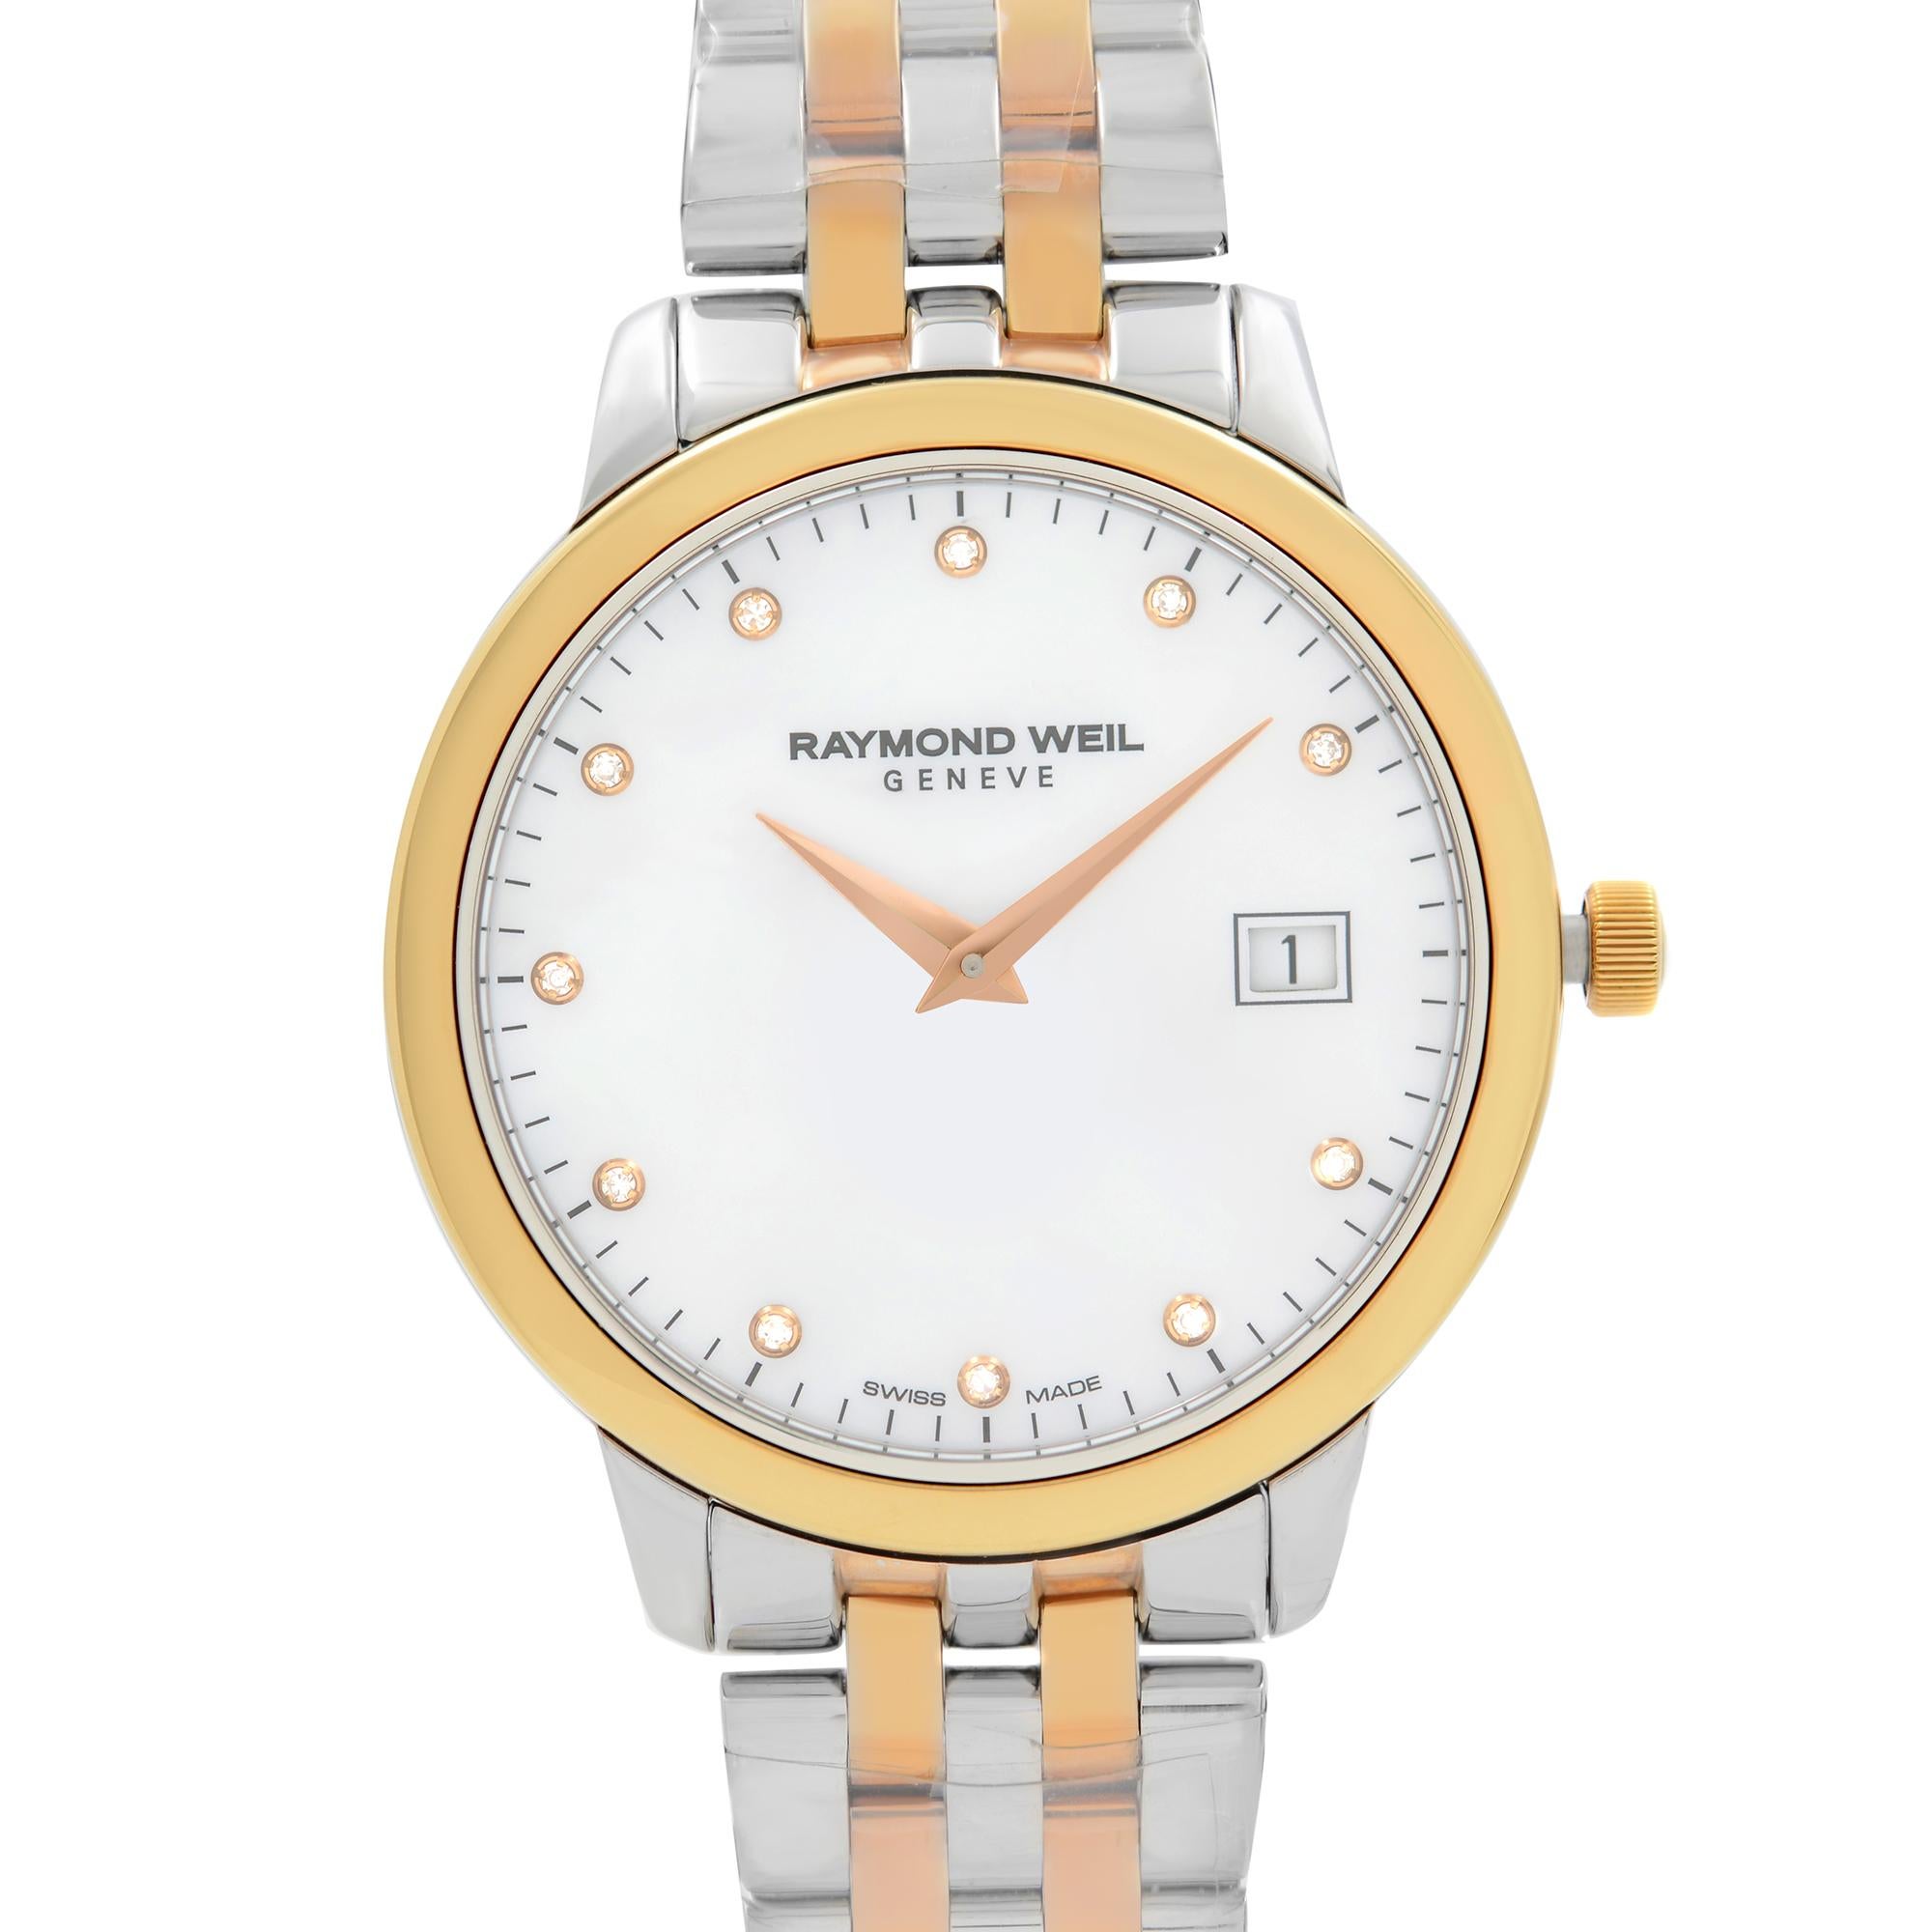 Store Display Model Raymond Weil Toccata Steel MOP Diamond Dial Ladies Watch. The Watch Might Have Minor Blemishes. This Beautiful Timepiece Features: Stainless Steel Case with a Two-Tone Stainless Steel Bracelet, Fixed Rose Gold PVD Bezel,